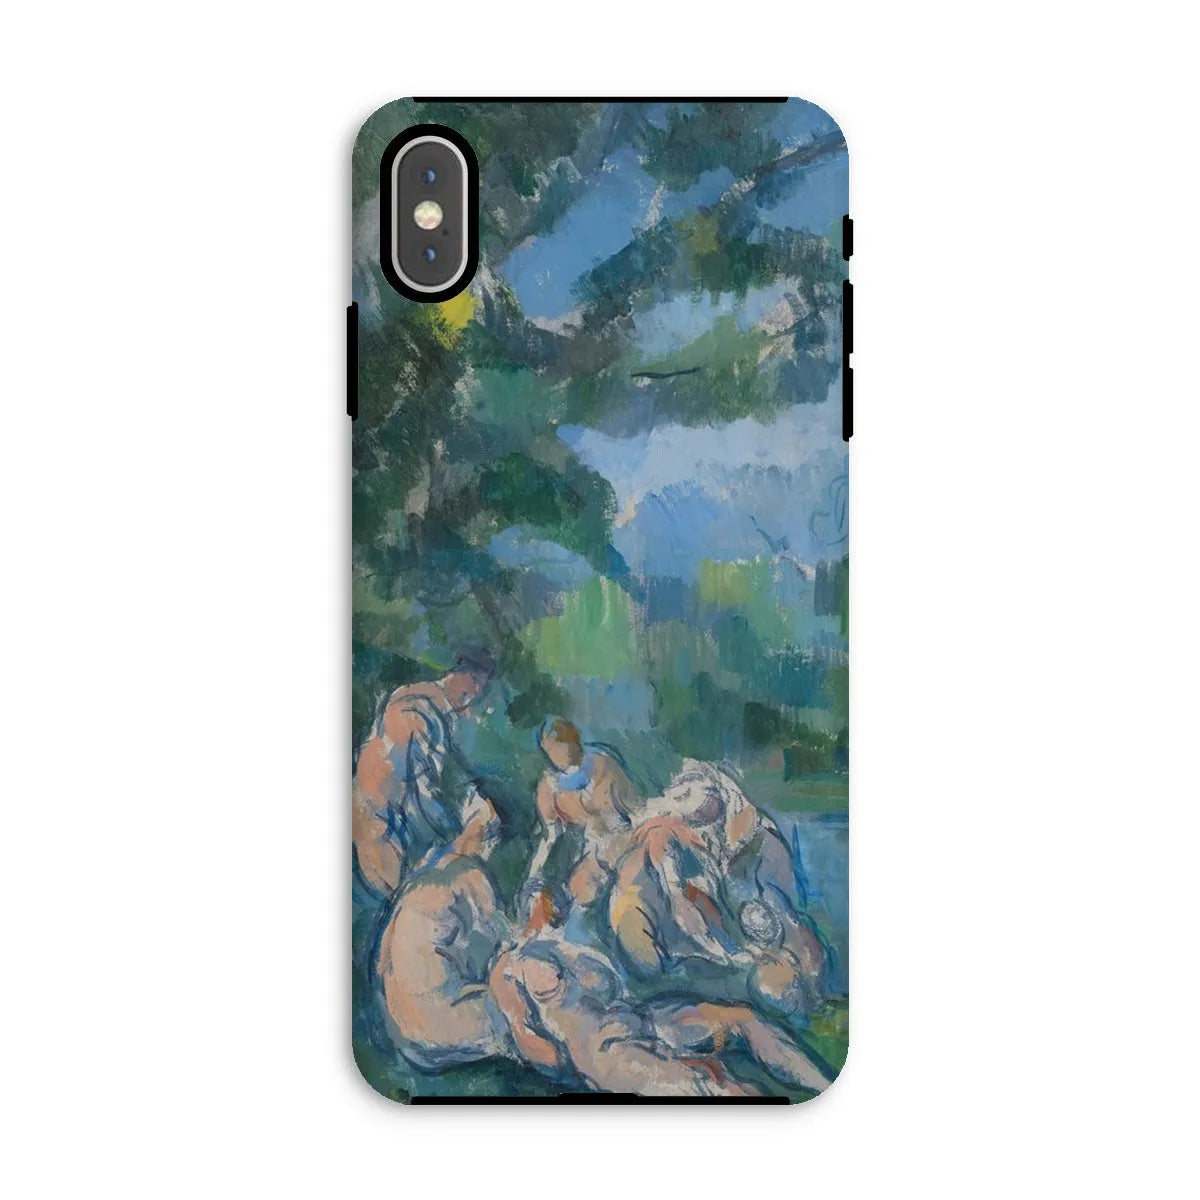 The Bathers - Post-impressionism Phone Case - Paul Cezanne - Iphone Xs Max / Matte - Mobile Phone Cases - Aesthetic Art